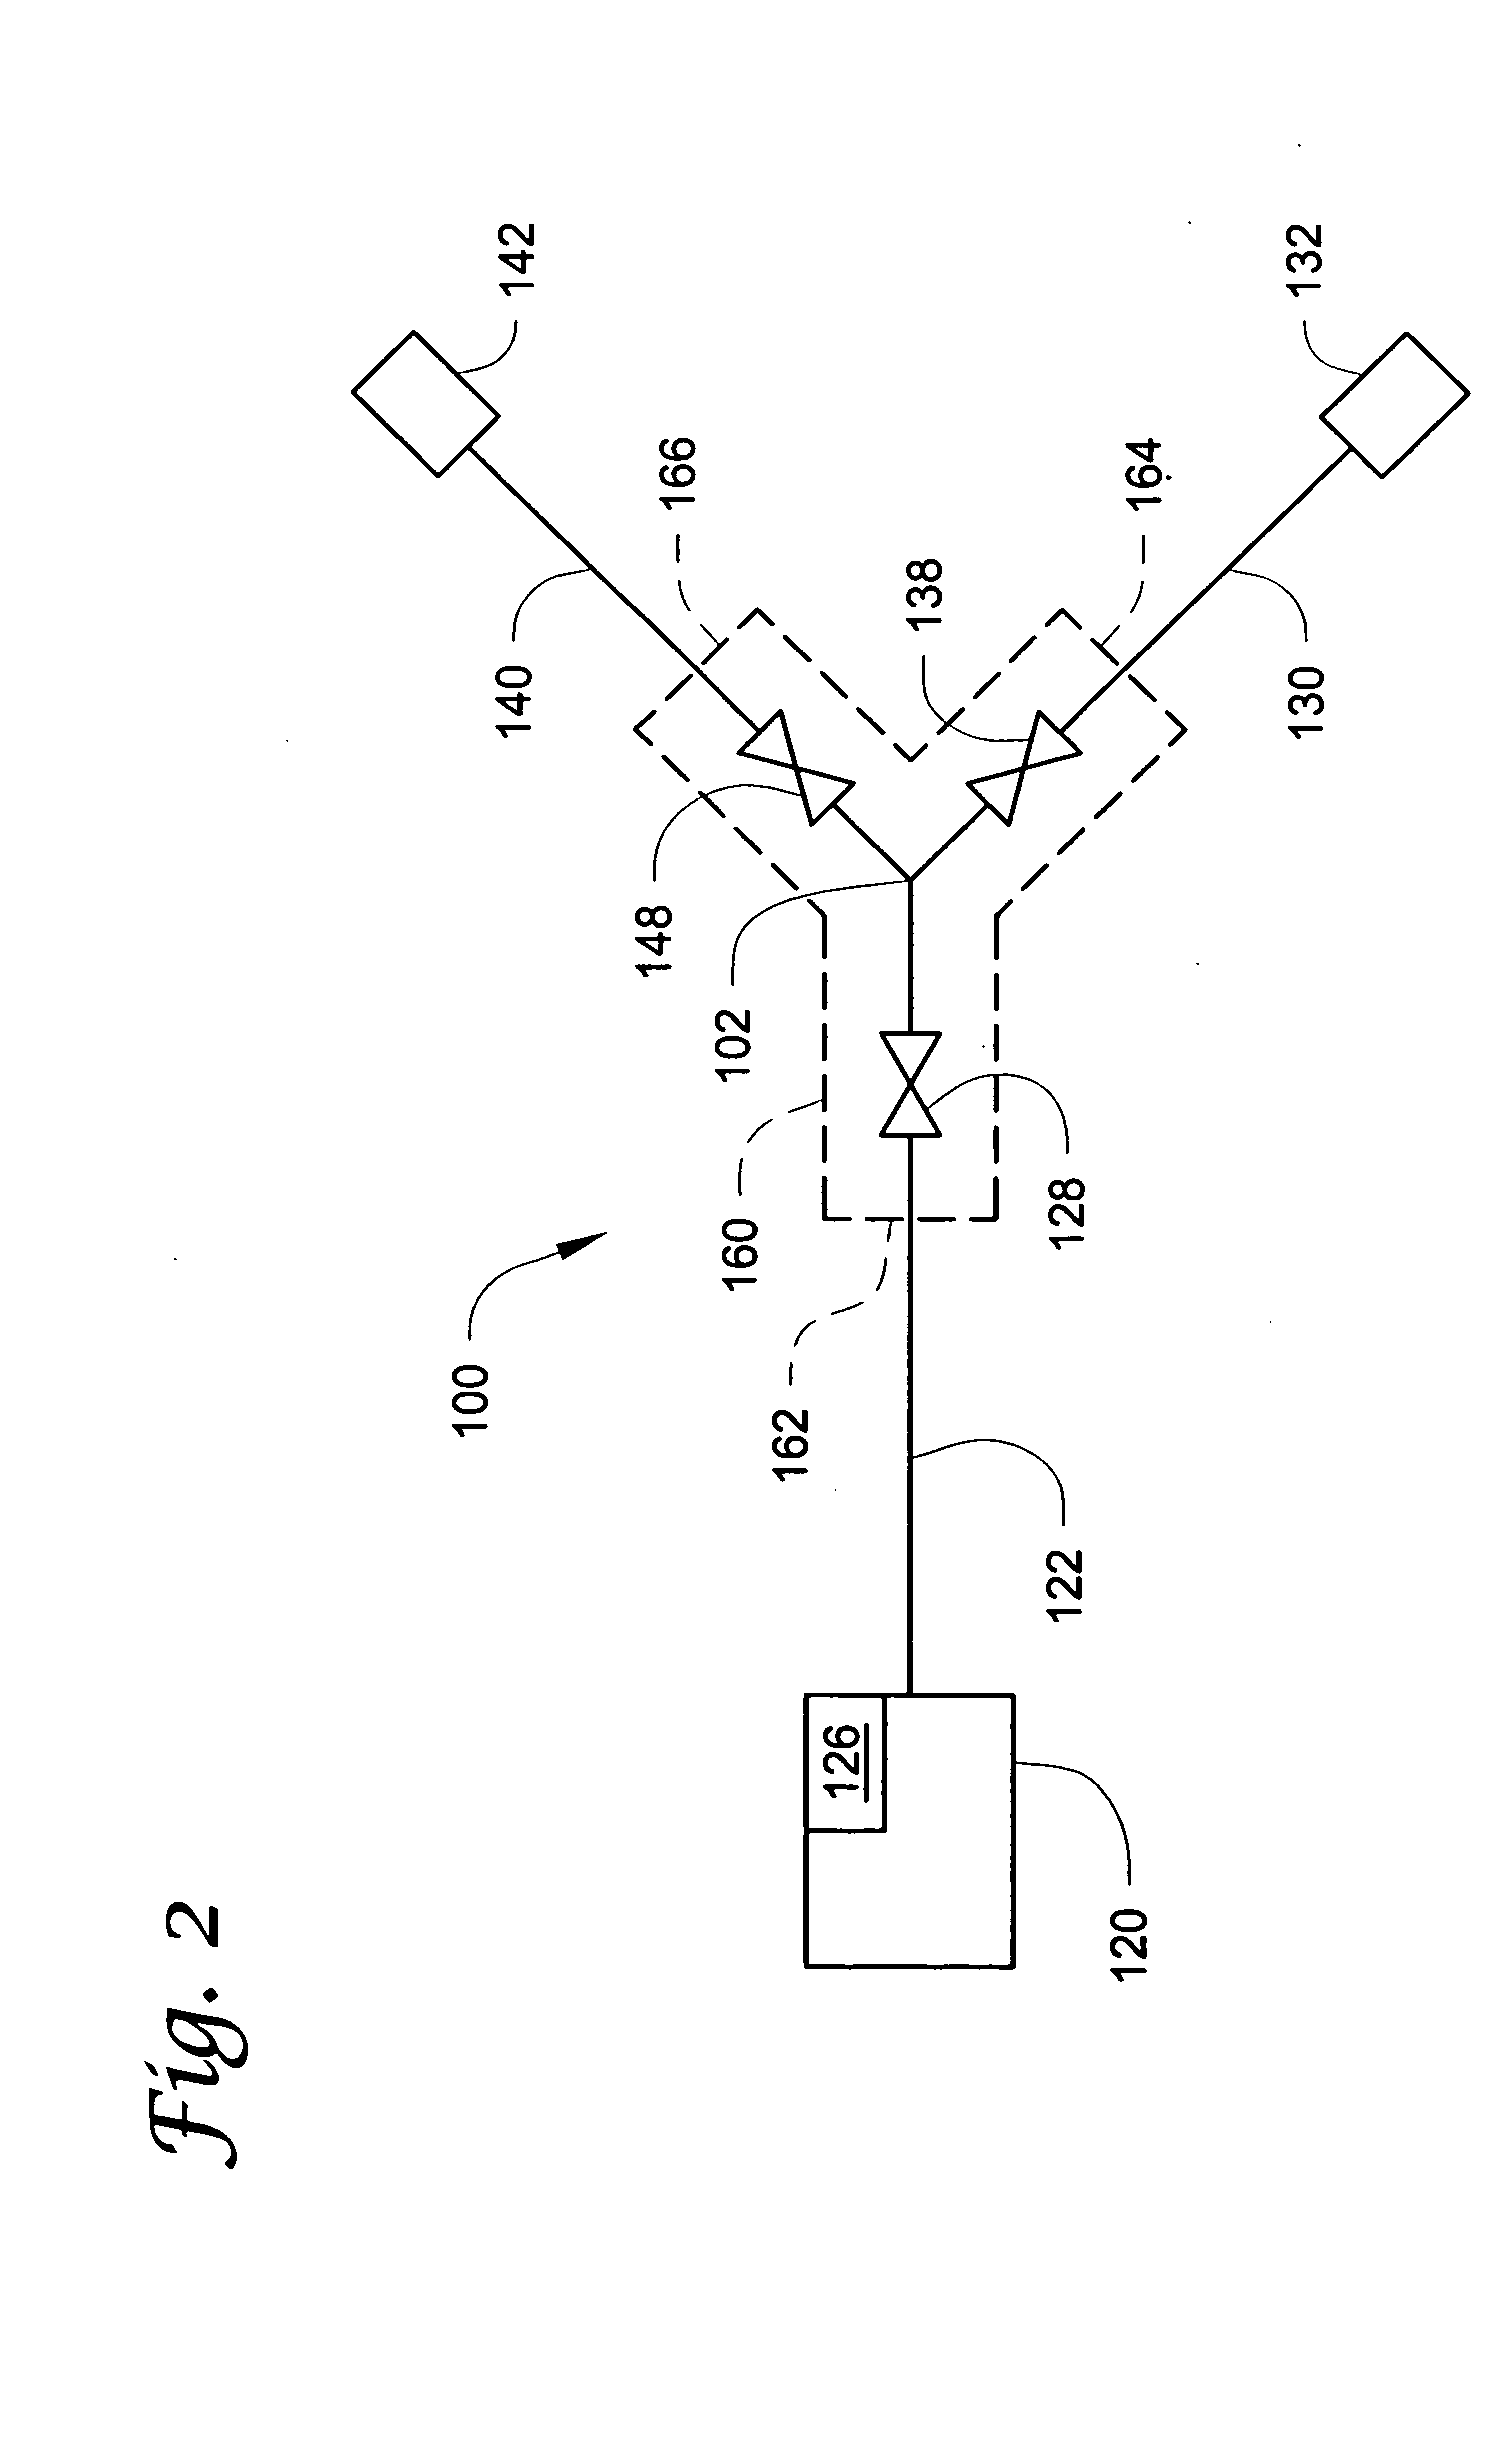 Branching catheter systems with diagnostic components